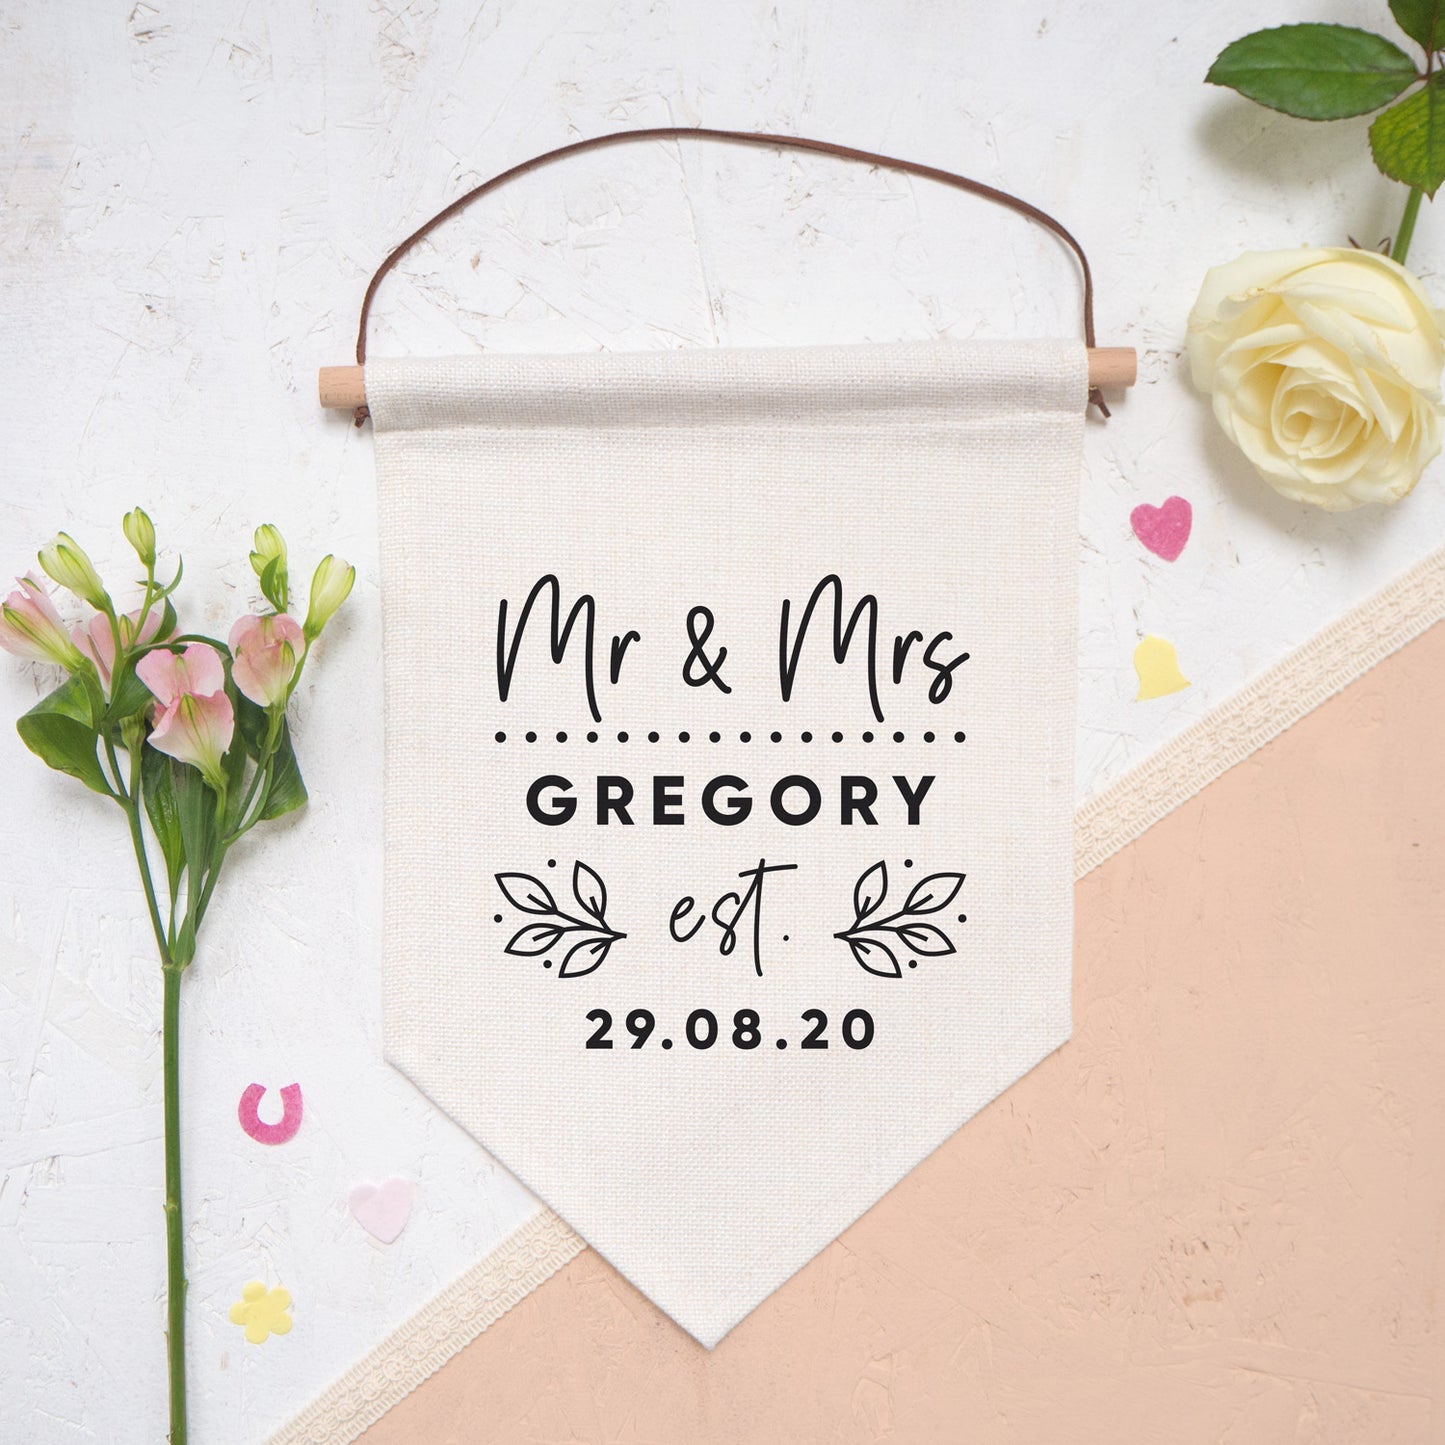 A personalised wedding pennant flag featuring your new title e.g. Mr & Mrs, your new family name and the date that you tied the knot. Photographed on a white and peach background with confetti and flowers either side of the flag.